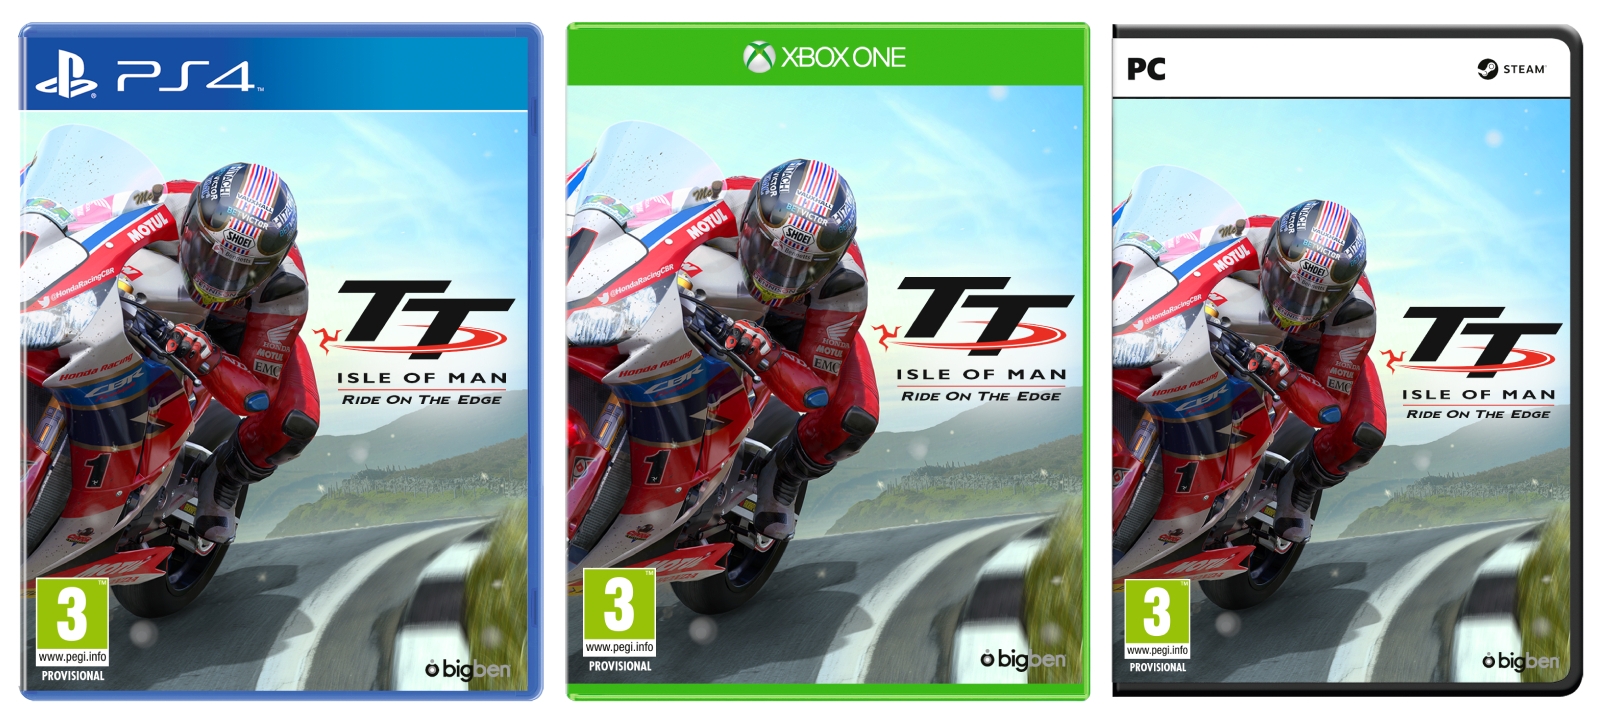 TT Isle of Man Ride on the Edge - Gamereview